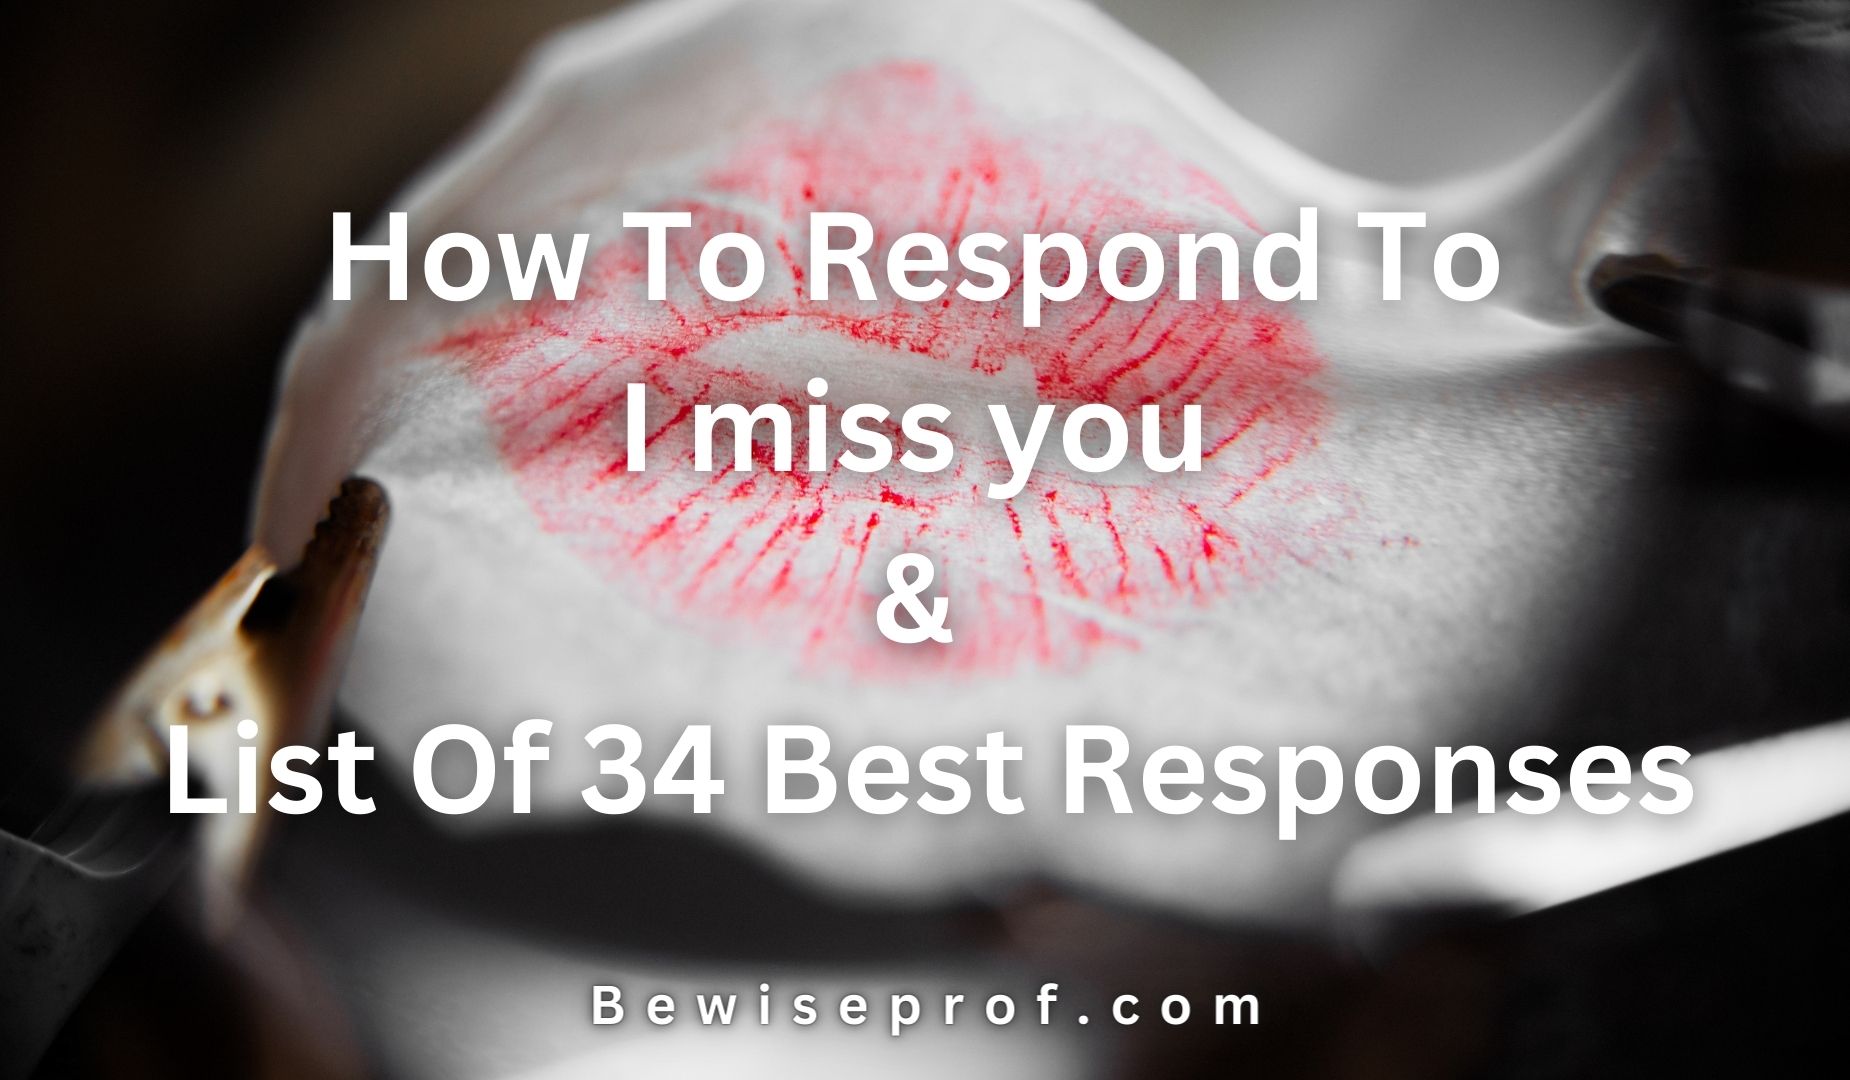 How To Respond To I miss you? & List Of 34 Best Responses